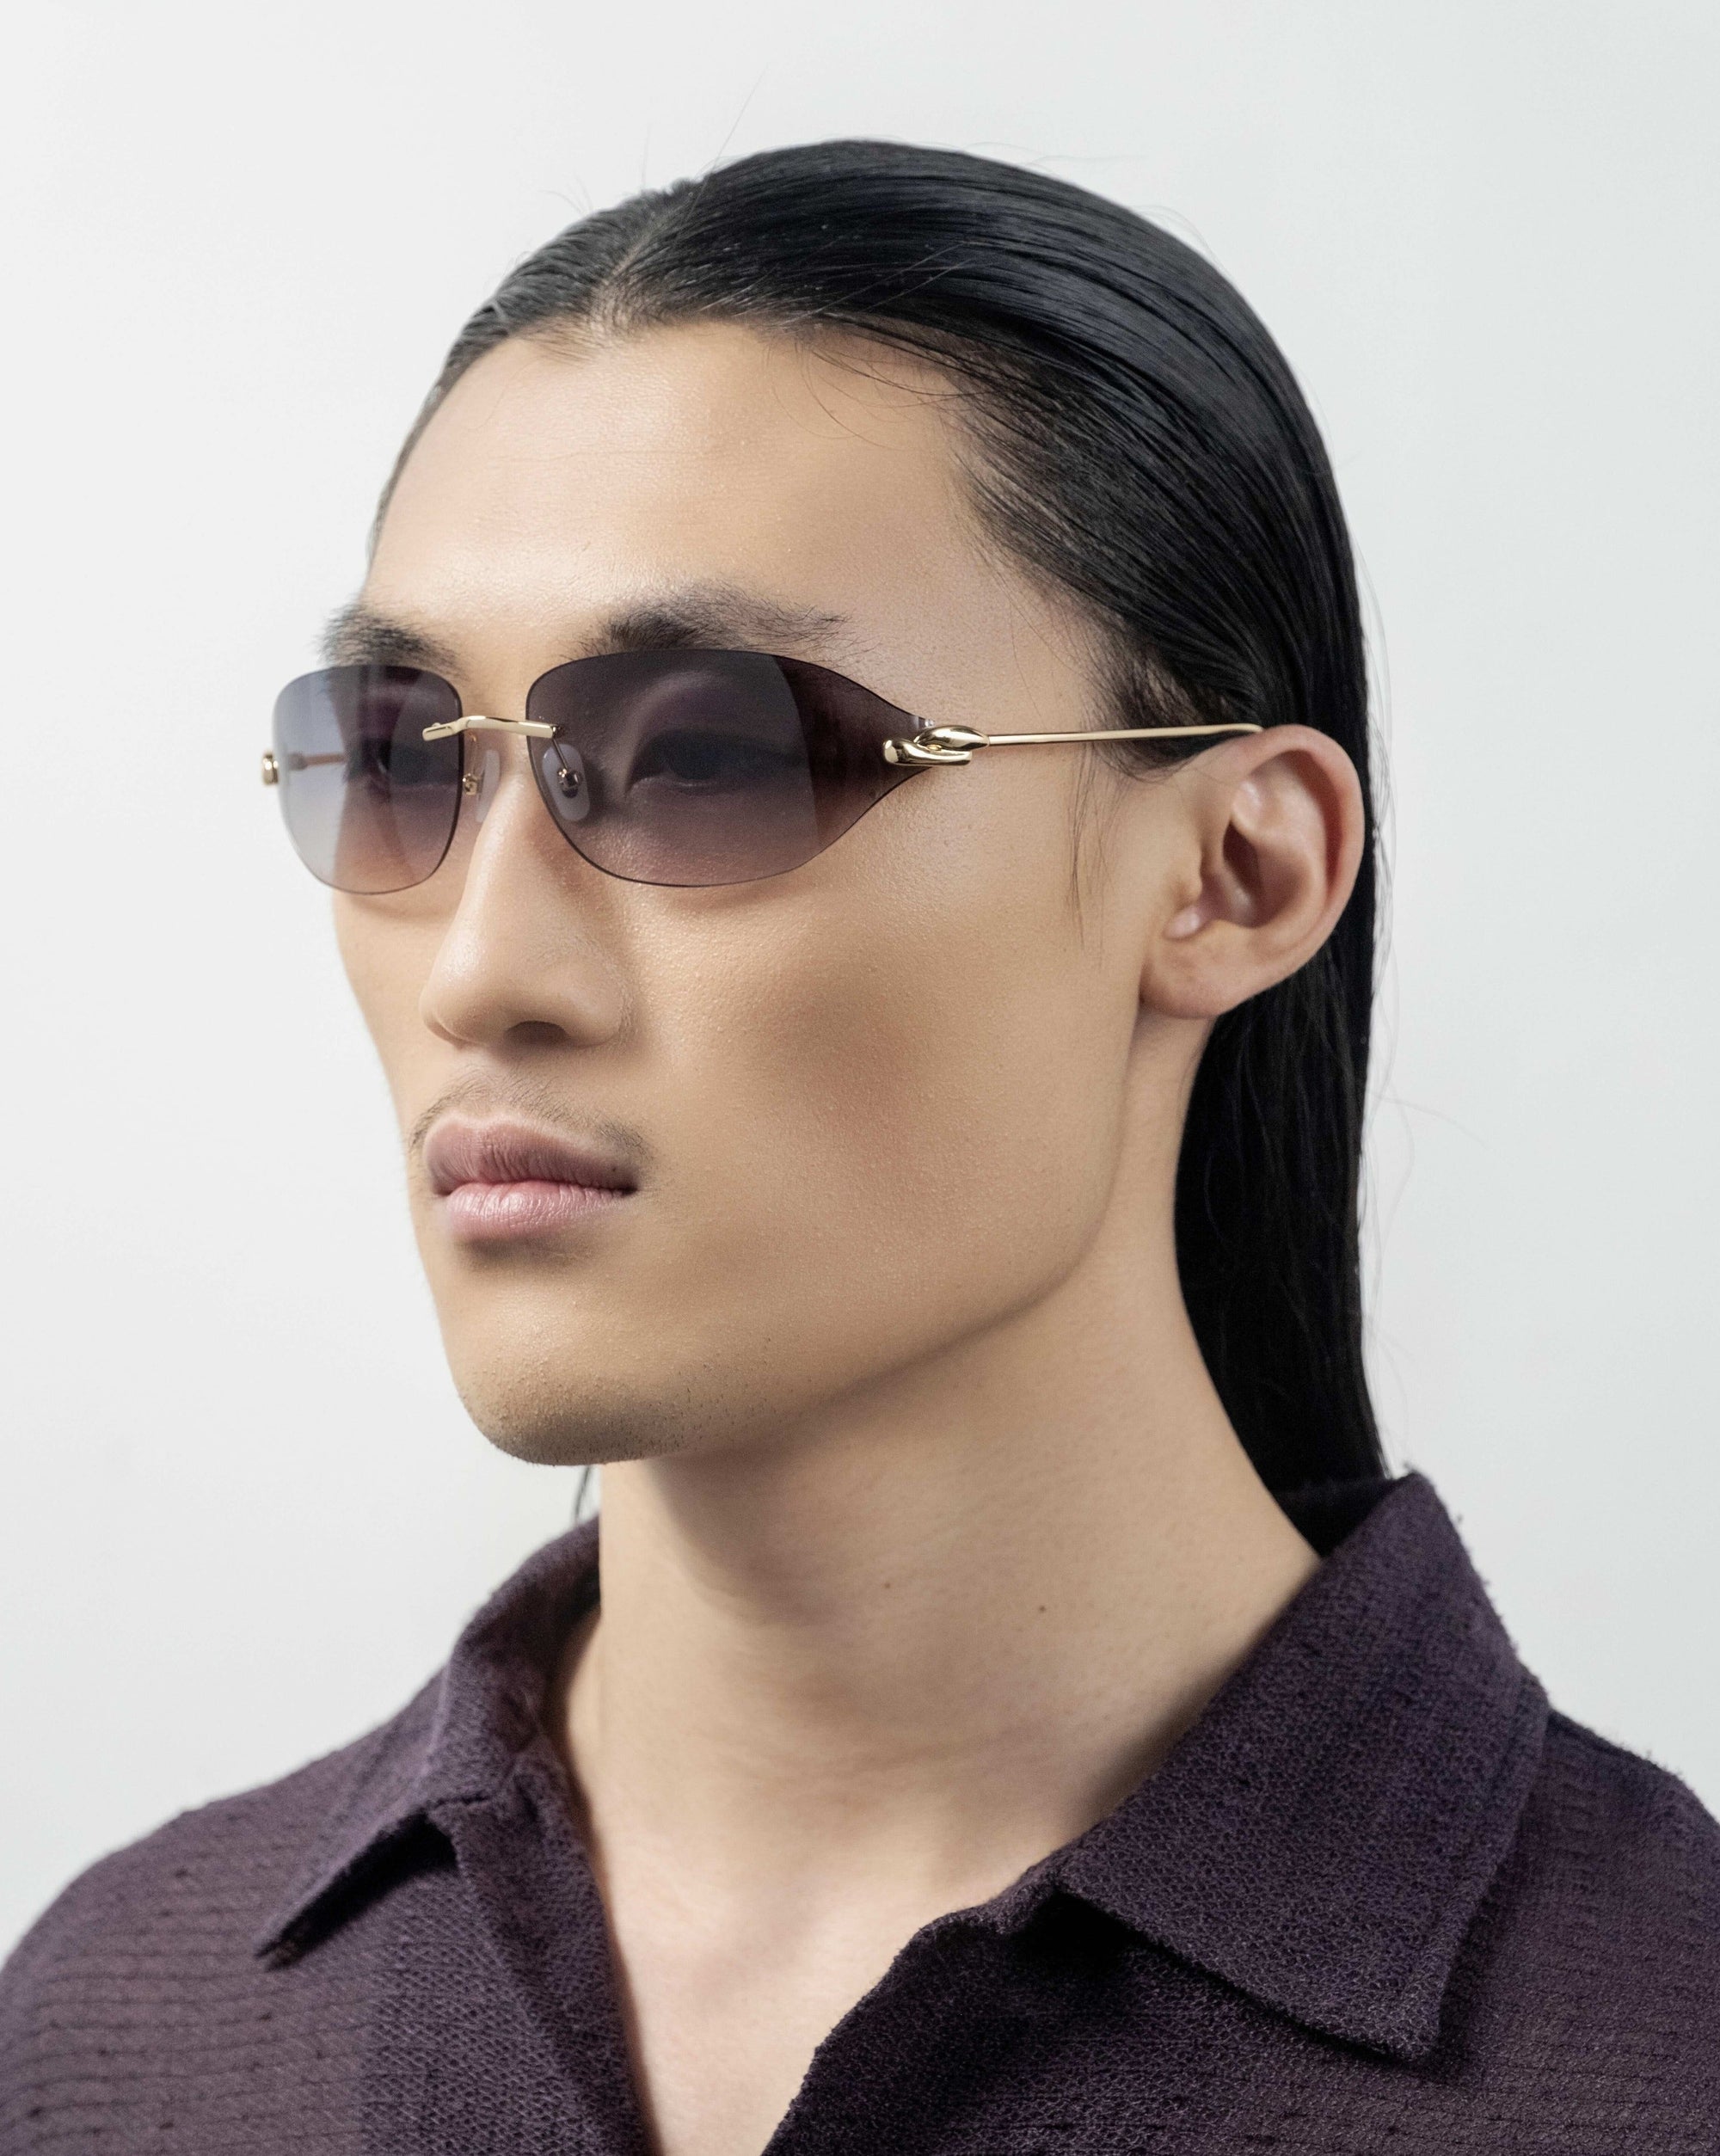 A person with long, sleek dark hair is seen wearing For Art&#39;s Sake® Serpent I frameless wrap lens oval-shaped sunglasses with golden temple arms. They are dressed in a dark, textured shirt and facing slightly left against a plain, light background.